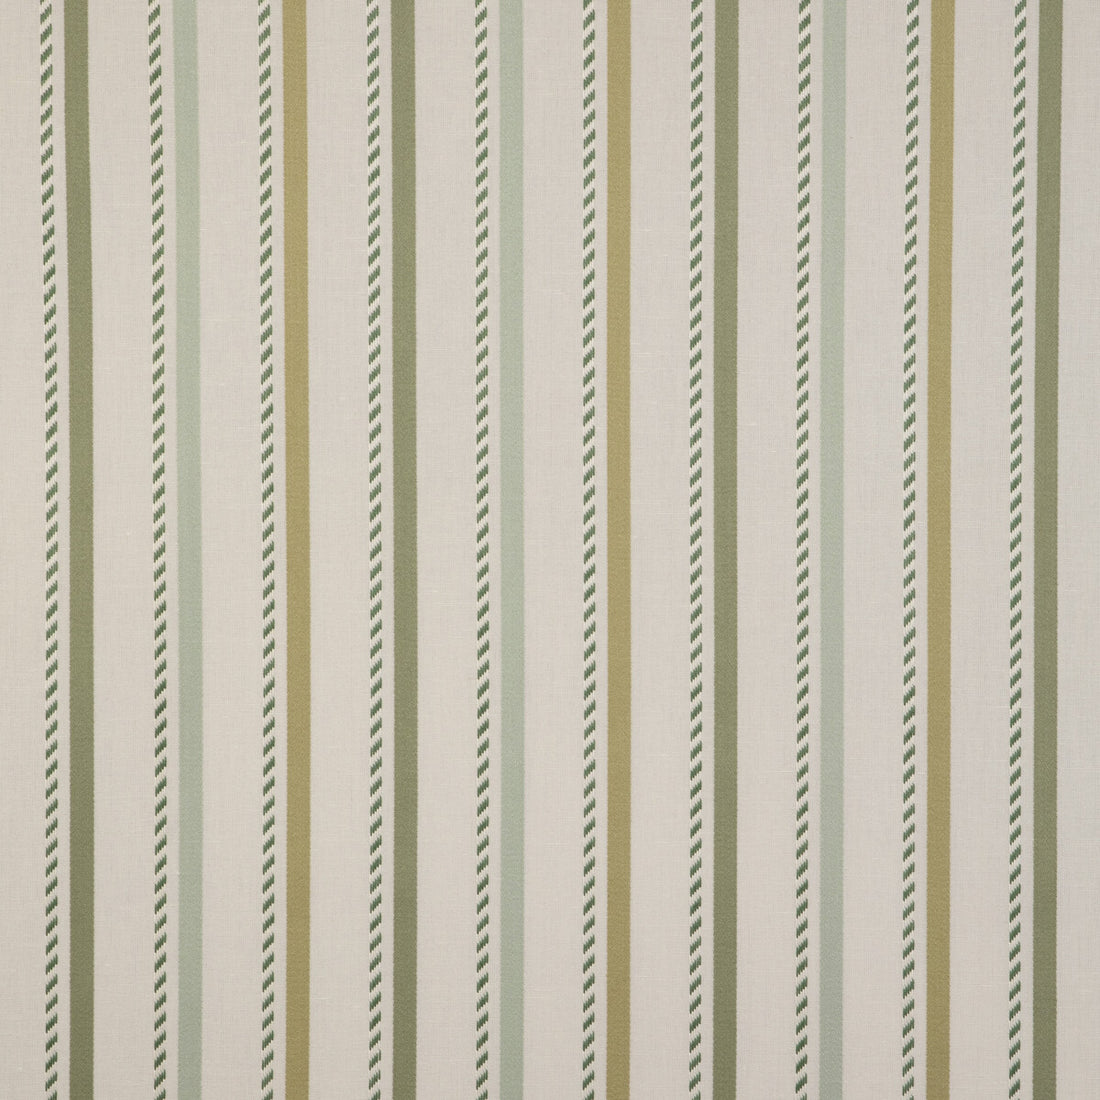 Buxton Stripe fabric in mist/kiwi color - pattern 2023106.353.0 - by Lee Jofa in the Highfield Stripes And Plaids collection